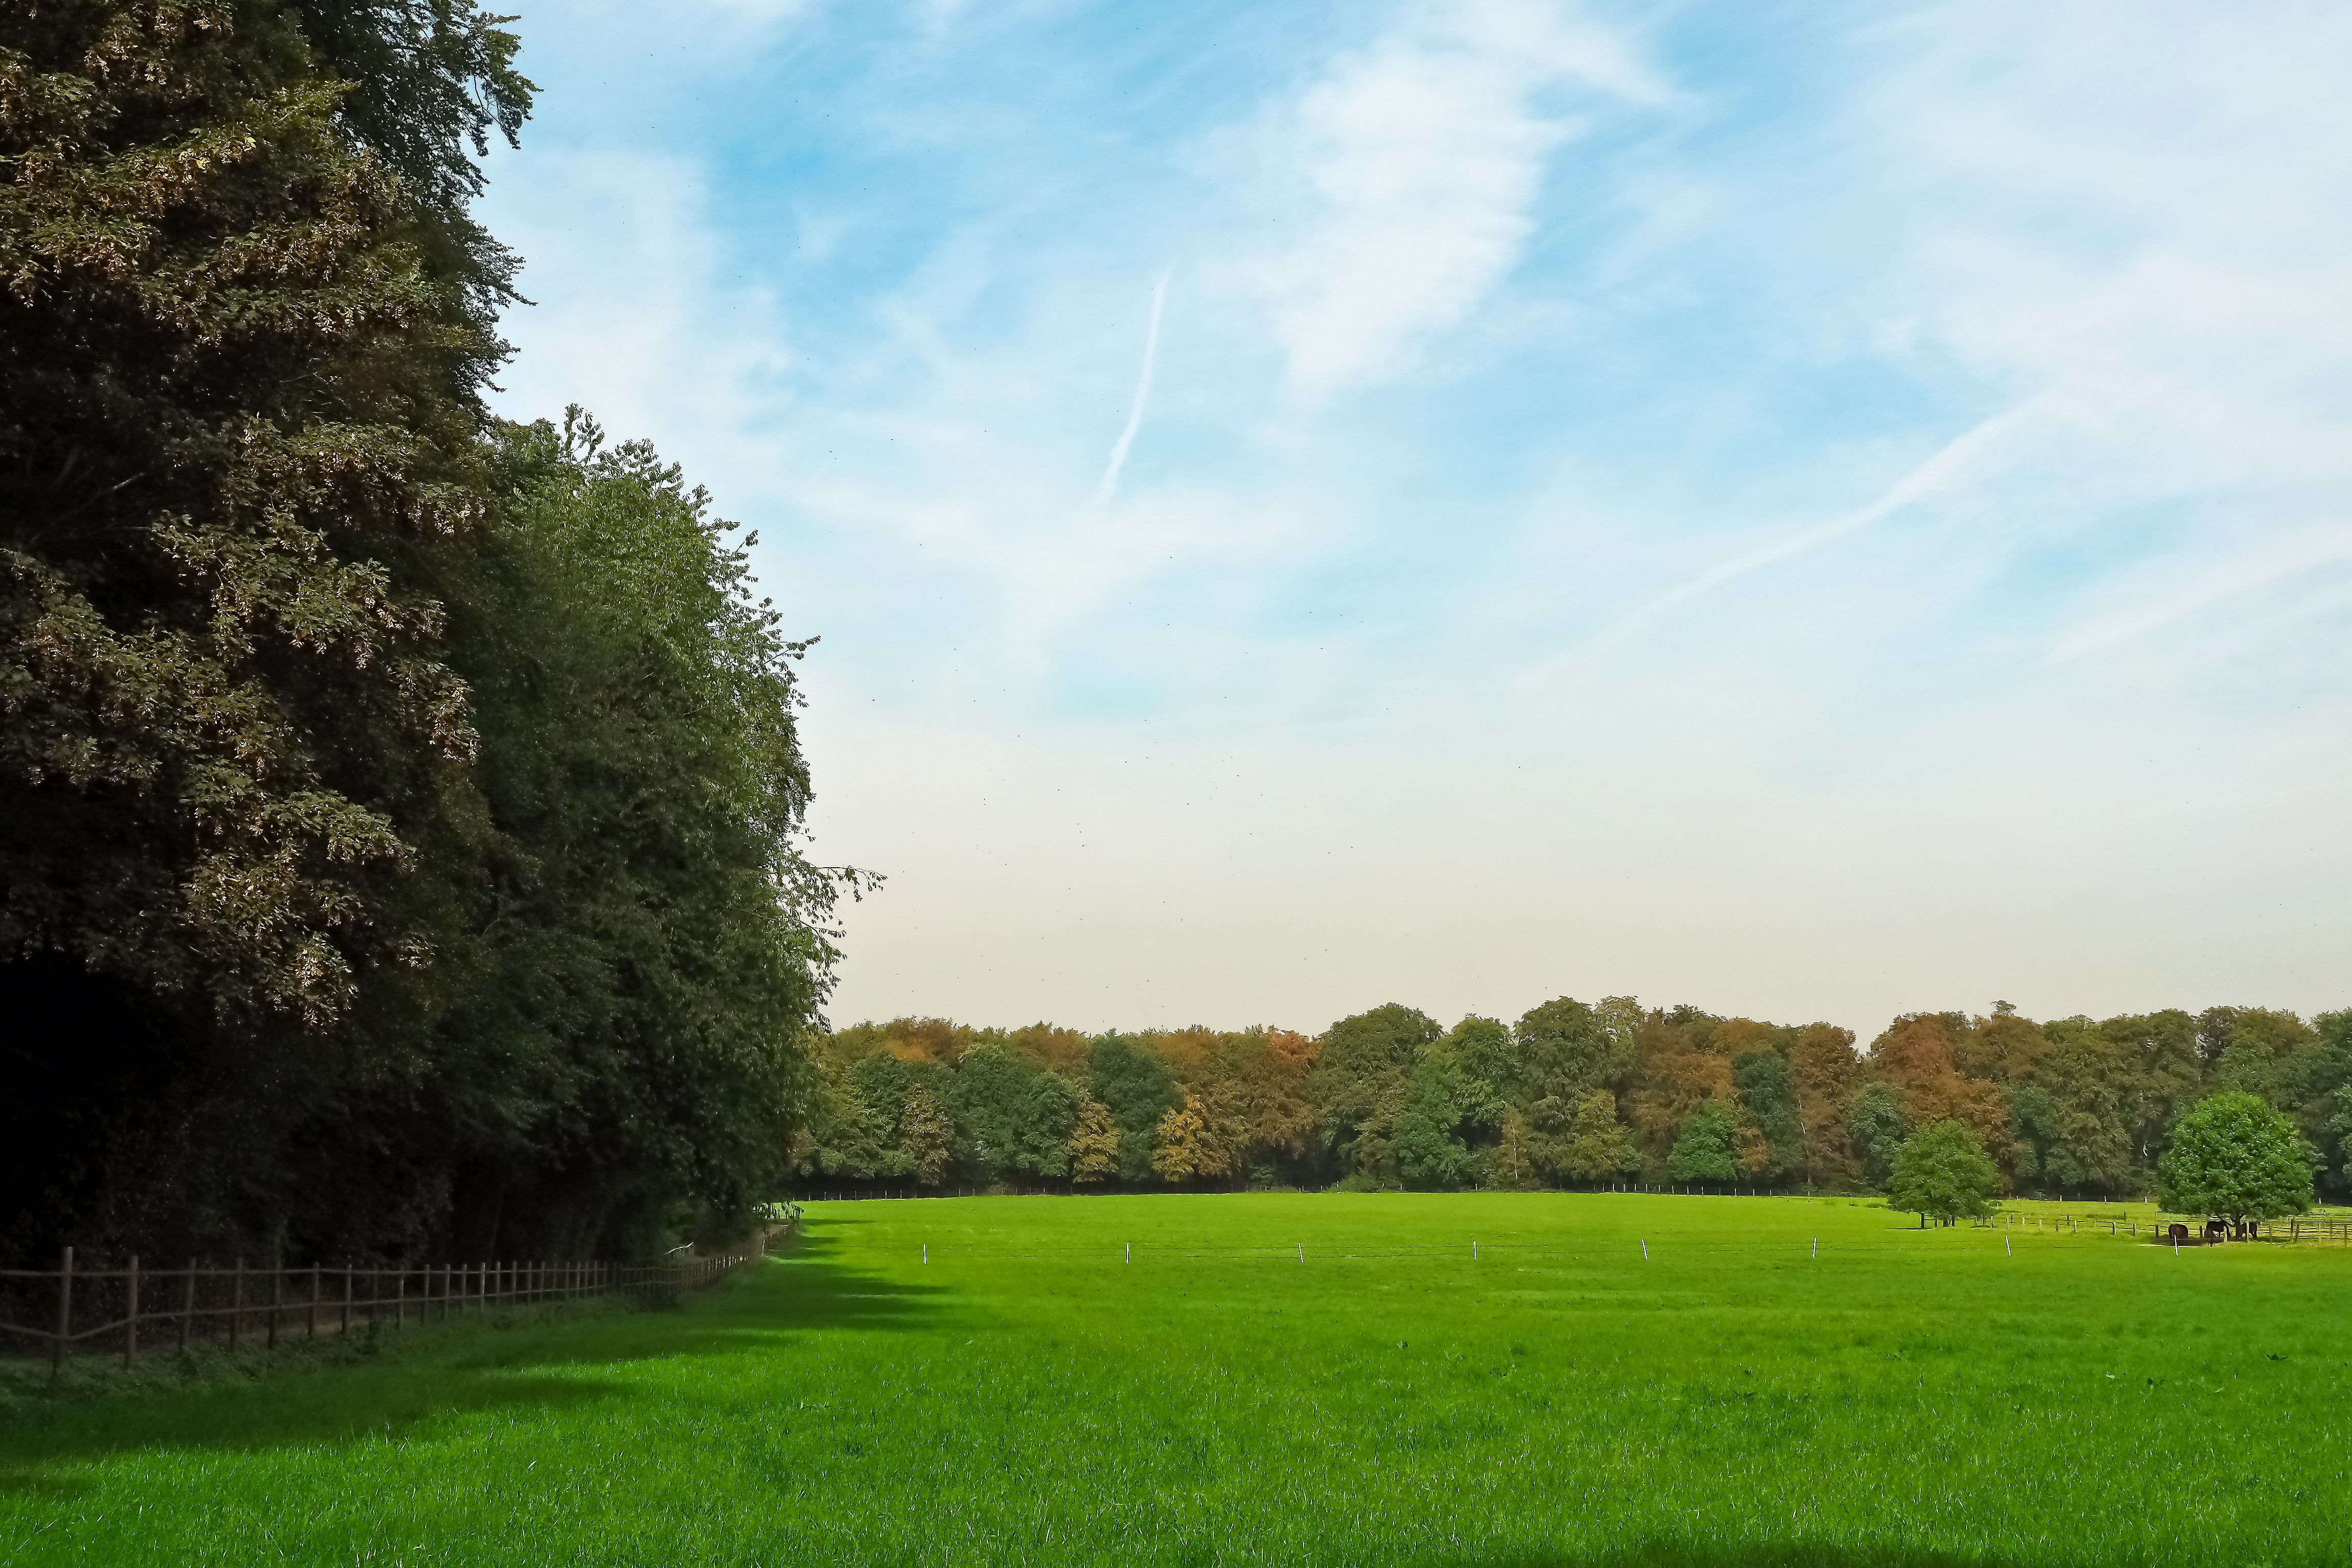 green grass field surrounded by trees during daytime